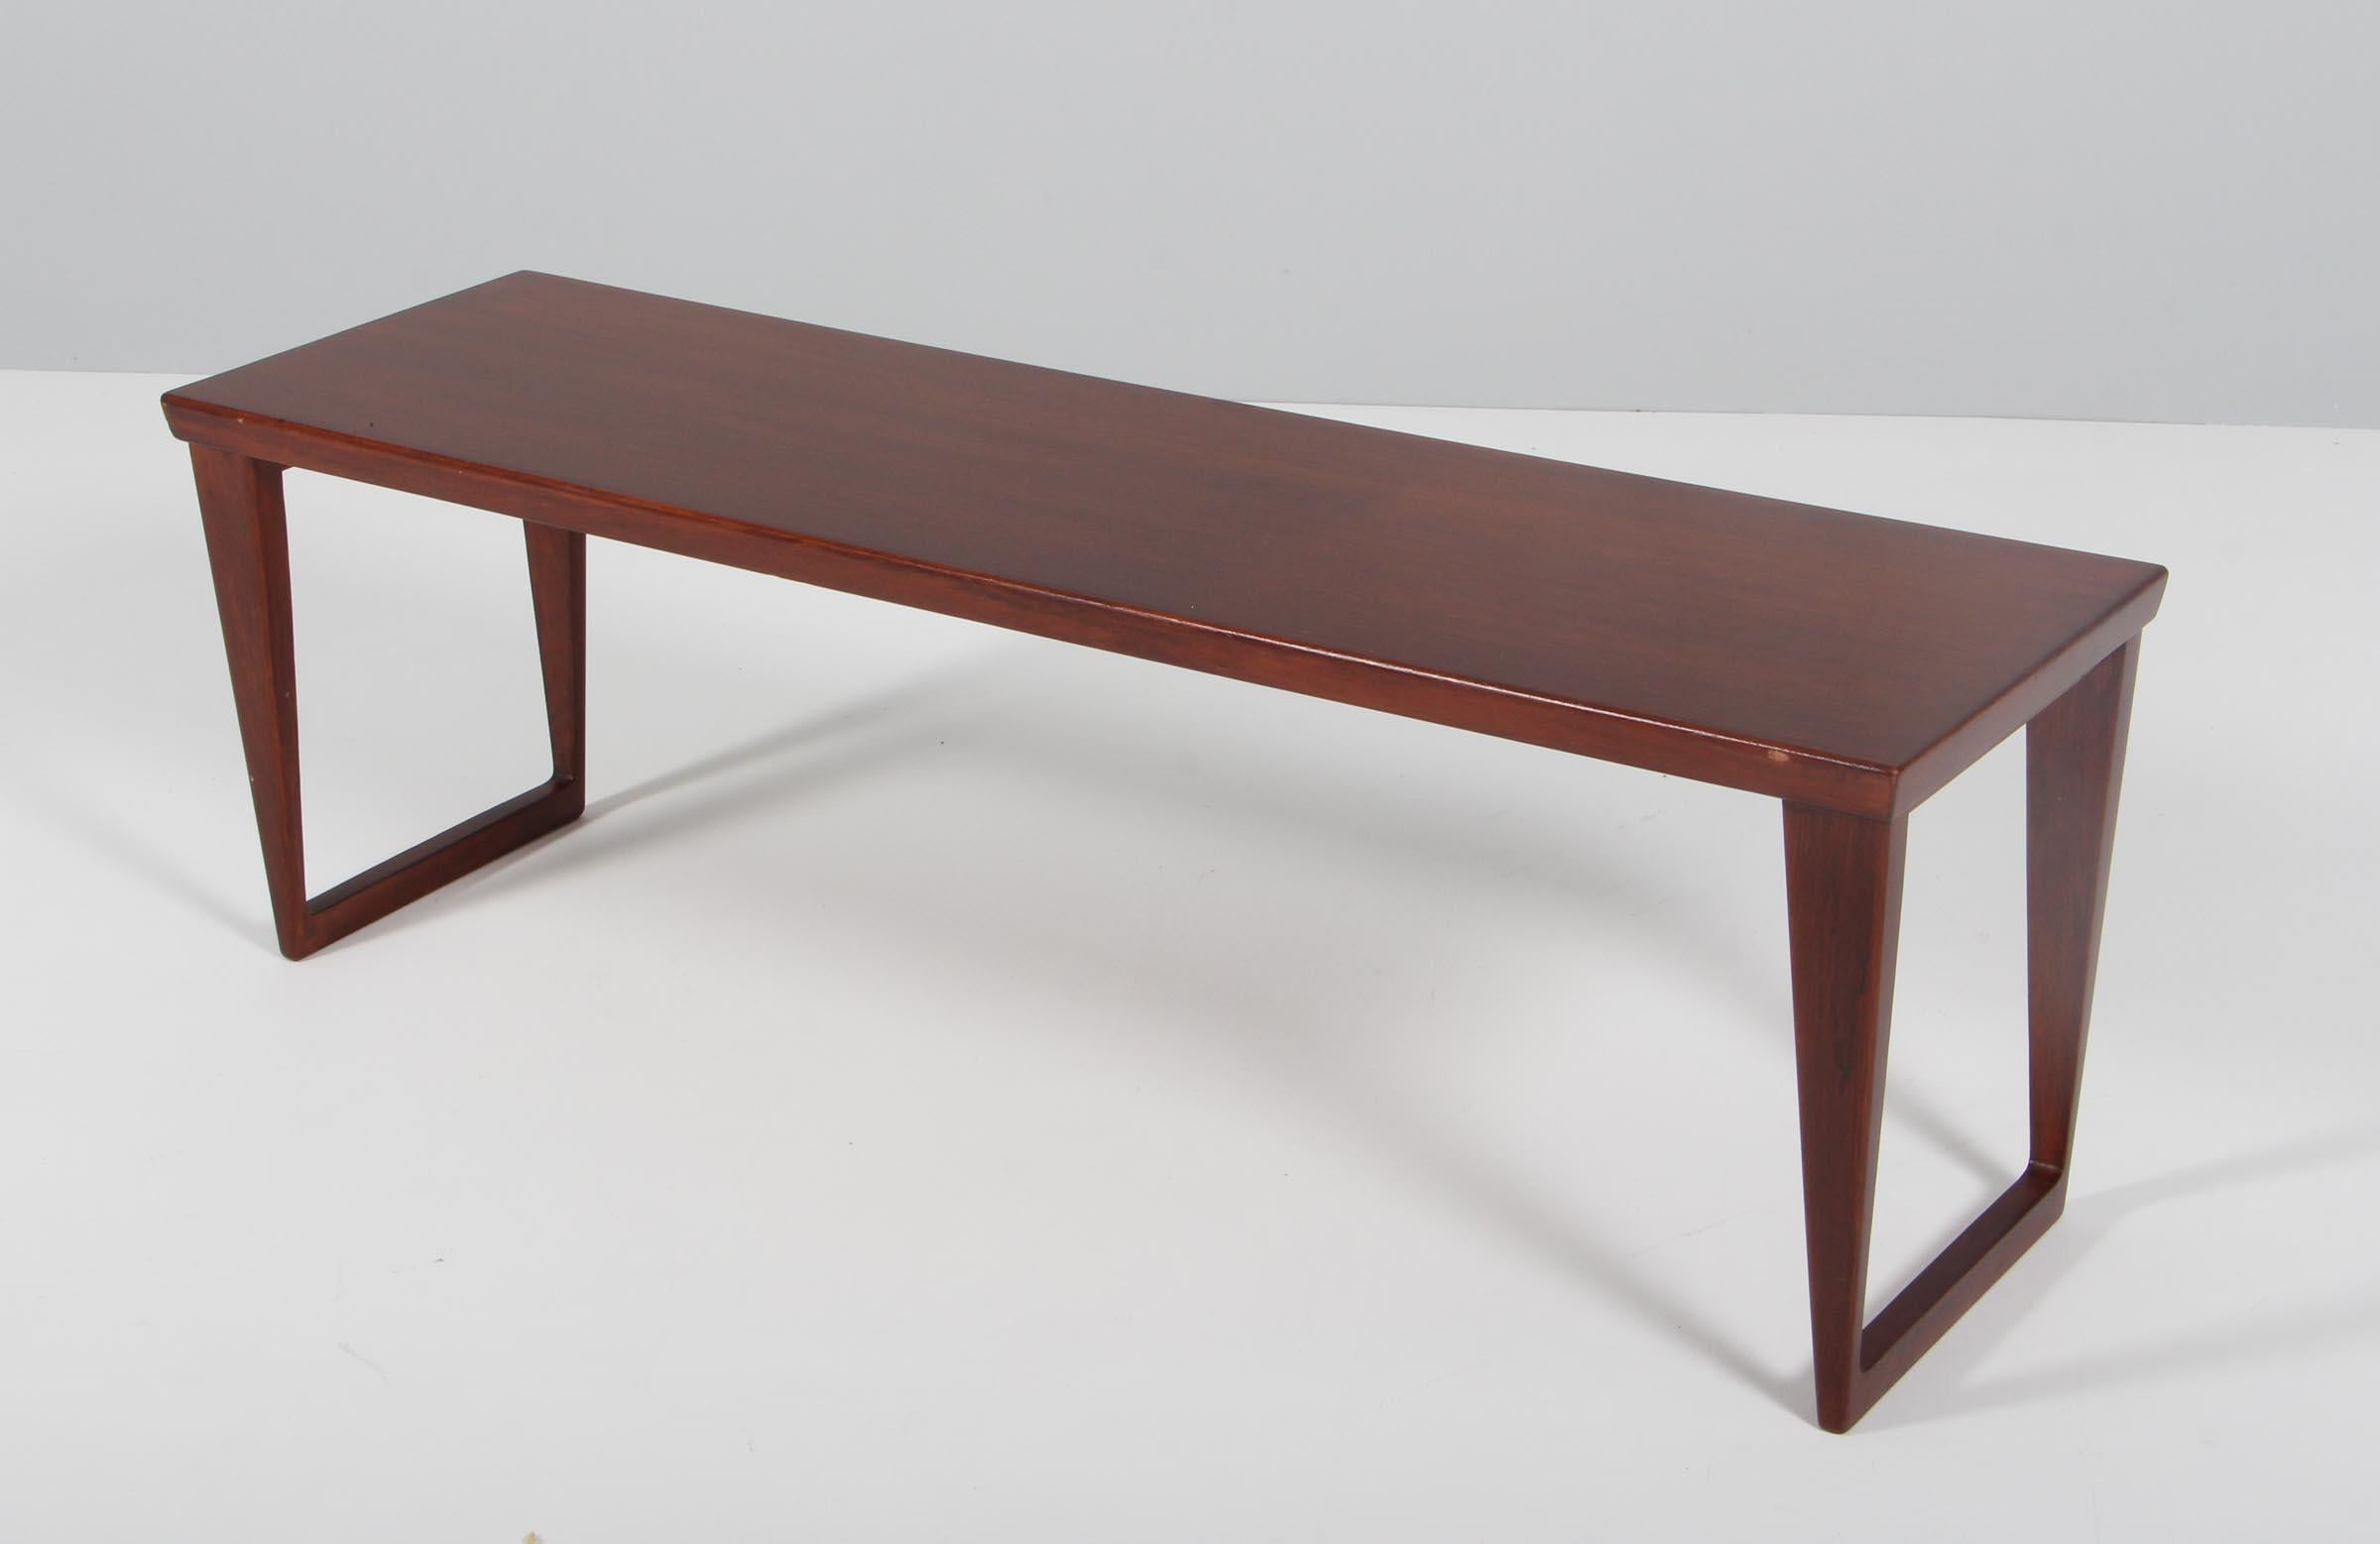 Kai Kristiansen bench with movable chest of drawers on top. 

Made of partly solid teak.

Made by Aksel Kjersgaard 1960s.